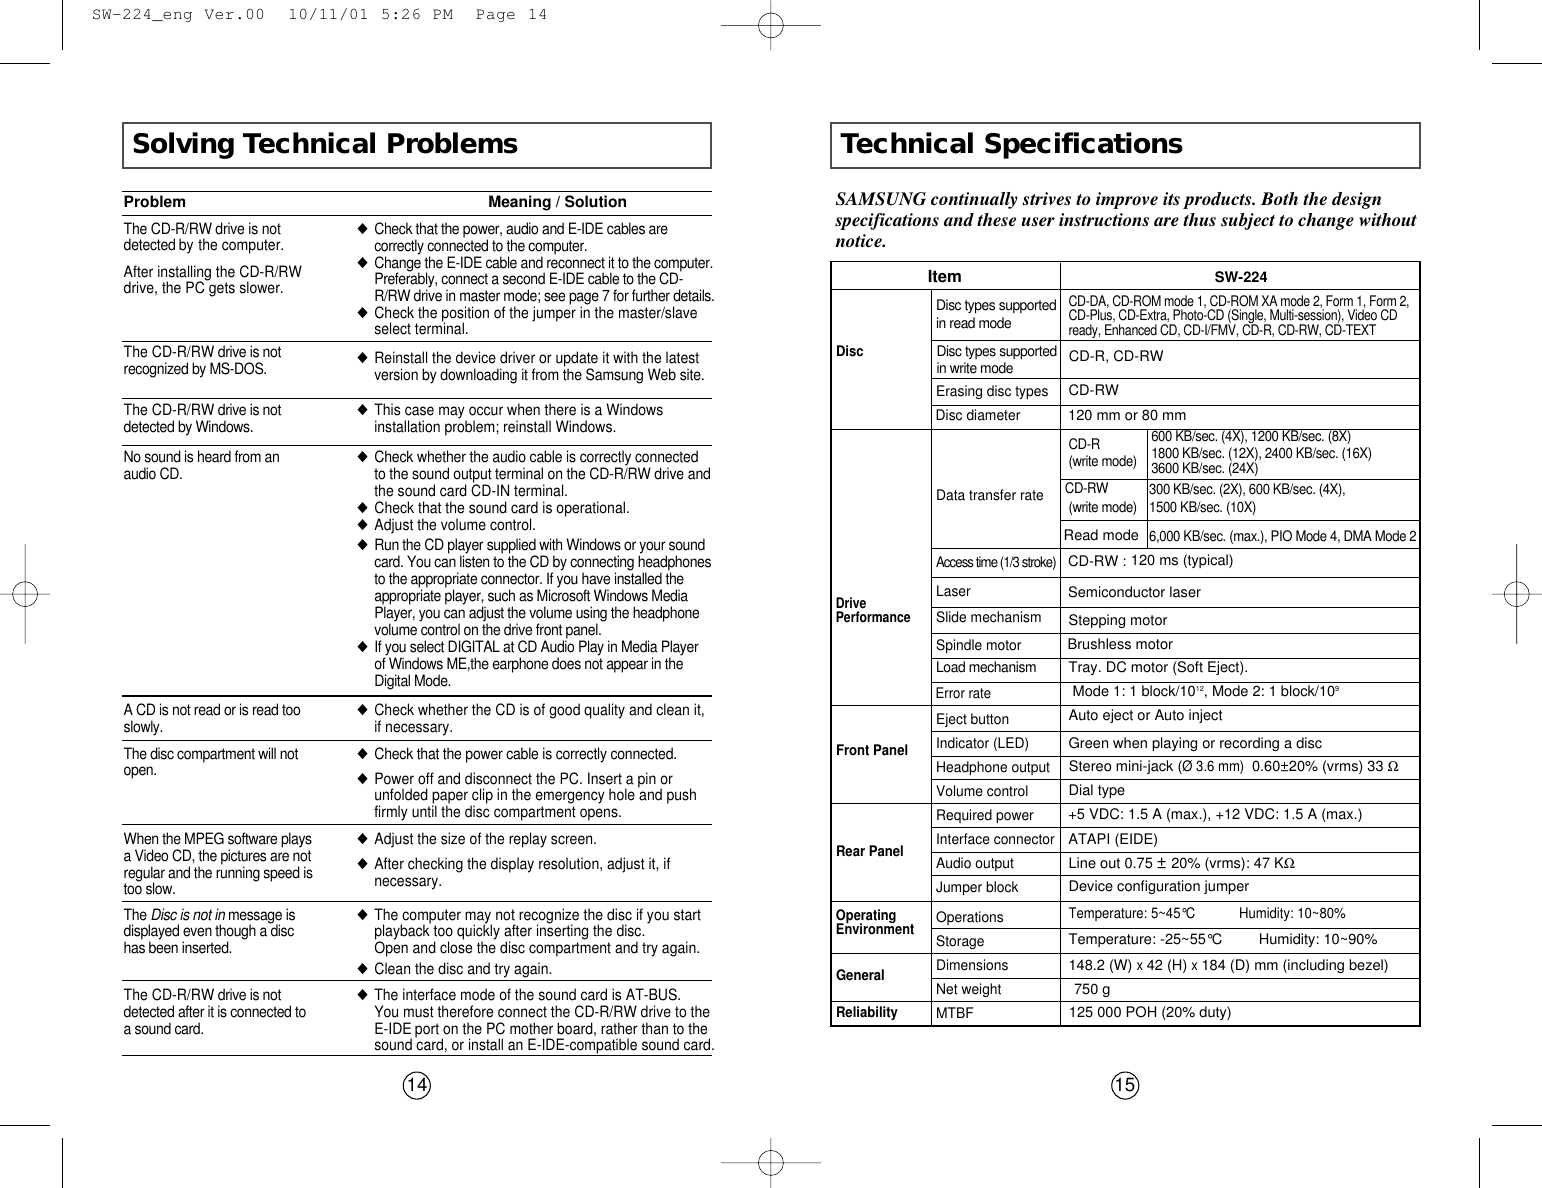 Technical Specifications15SAMSUNG continually strives to improve its products. Both the designspecifications and these user instructions are thus subject to change withoutnotice.CD-R (write mode)(write mode)600 KB/sec. (4X), 1200 KB/sec. (8X)1800 KB/sec. (12X), 2400 KB/sec. (16X)3600 KB/sec. (24X)DiscError rateRear PanelFront PanelOperatingEnvironmentGeneralReliabilityDrivePerformanceDisc diameterDisc types supportedin read modeData transfer rateAccess time (1/3 stroke)LaserSlide mechanismSpindle motorLoad mechanismEject buttonIndicator (LED)Headphone outputVolume controlDimensionsNet weightOperationsStorage Required powerInterface connectorAudio outputJumper blockMTBFCD-DA, CD-ROM mode 1, CD-ROM XA mode 2, Form 1, Form 2,CD-Plus, CD-Extra, Photo-CD (Single, Multi-session), Video CDready, Enhanced CD, CD-I/FMV, CD-R, CD-RW, CD-TEXT120 mm or 80 mmErasing disc typesCD-RWRead mode 120 ms (typical)Stepping motorBrushless motorTray. DC motor (Soft Eject).Mode 1: 1 block/1012, Mode 2: 1 block/109Auto eject or Auto injectGreen when playing or recording a discStereo mini-jack (Ø 3.6 mm) 0.60±20% (vrms) 33 ΩDial type+5 VDC: 1.5 A (max.), +12 VDC: 1.5 A (max.)ATAPI (EIDE)Line out 0.75 ±20% (vrms): 47 KΩDevice configuration jumperTemperature: 5~45°C            Humidity: 10~80%148.2 (W) x 42 (H) x 184 (D) mm (including bezel)750 g 125 000 POH (20% duty)Semiconductor laserItem SW-224Temperature: -25~55°C         Humidity: 10~90%Solving Technical Problems14The CD-R/RW drive is notdetected by the computer.After installing the CD-R/RWdrive, the PC gets slower.◆Check that the power, audio and E-IDE cables arecorrectly connected to the computer.◆Change the E-IDE cable and reconnect it to the computer.Preferably, connect a second E-IDE cable to the CD-R/RW drive in master mode; see page 7 for further details.◆Check the position of the jumper in the master/slaveselect terminal.Problem Meaning / SolutionThe CD-R/RW drive is notrecognized by MS-DOS. ◆Reinstall the device driver or update it with the latestversion by downloading it from the Samsung Web site.The CD-R/RW drive is notdetected by Windows. ◆This case may occur when there is a Windowsinstallation problem; reinstall Windows.No sound is heard from anaudio CD. ◆Check whether the audio cable is correctly connected to the sound output terminal on the CD-R/RW drive andthe sound card CD-IN terminal. ◆Check that the sound card is operational.◆Adjust the volume control.◆Run the CD player supplied with Windows or your soundcard. You can listen to the CD by connecting headphonesto the appropriate connector. If you have installed theappropriate player, such as Microsoft Windows MediaPlayer, you can adjust the volume using the headphonevolume control on the drive front panel.◆If you select DIGITAL at CD Audio Play in Media Playerof Windows ME,the earphone does not appear in theDigital Mode.A CD is not read or is read tooslowly. ◆Check whether the CD is of good quality and clean it, if necessary.When the MPEG software playsa Video CD, the pictures are notregular and the running speed istoo slow.◆Adjust the size of the replay screen.◆After checking the display resolution, adjust it, ifnecessary.The Disc is not in message isdisplayed even though a dischas been inserted.◆The computer may not recognize the disc if you startplayback too quickly after inserting the disc. Open and close the disc compartment and try again.◆Clean the disc and try again.The CD-R/RW drive is notdetected after it is connected toa sound card.◆The interface mode of the sound card is AT-BUS. You must therefore connect the CD-R/RW drive to theE-IDE port on the PC mother board, rather than to thesound card, or install an E-IDE-compatible sound card.The disc compartment will notopen. ◆Check that the power cable is correctly connected.◆Power off and disconnect the PC. Insert a pin orunfolded paper clip in the emergency hole and pushfirmly until the disc compartment opens.300 KB/sec. (2X), 600 KB/sec. (4X), 1500 KB/sec. (10X)6,000 KB/sec. (max.), PIO Mode 4, DMA Mode 2CD-R, CD-RWDisc types supported in write modeCD-RWCD-RW :  SW-224_eng Ver.00  10/11/01 5:26 PM  Page 14